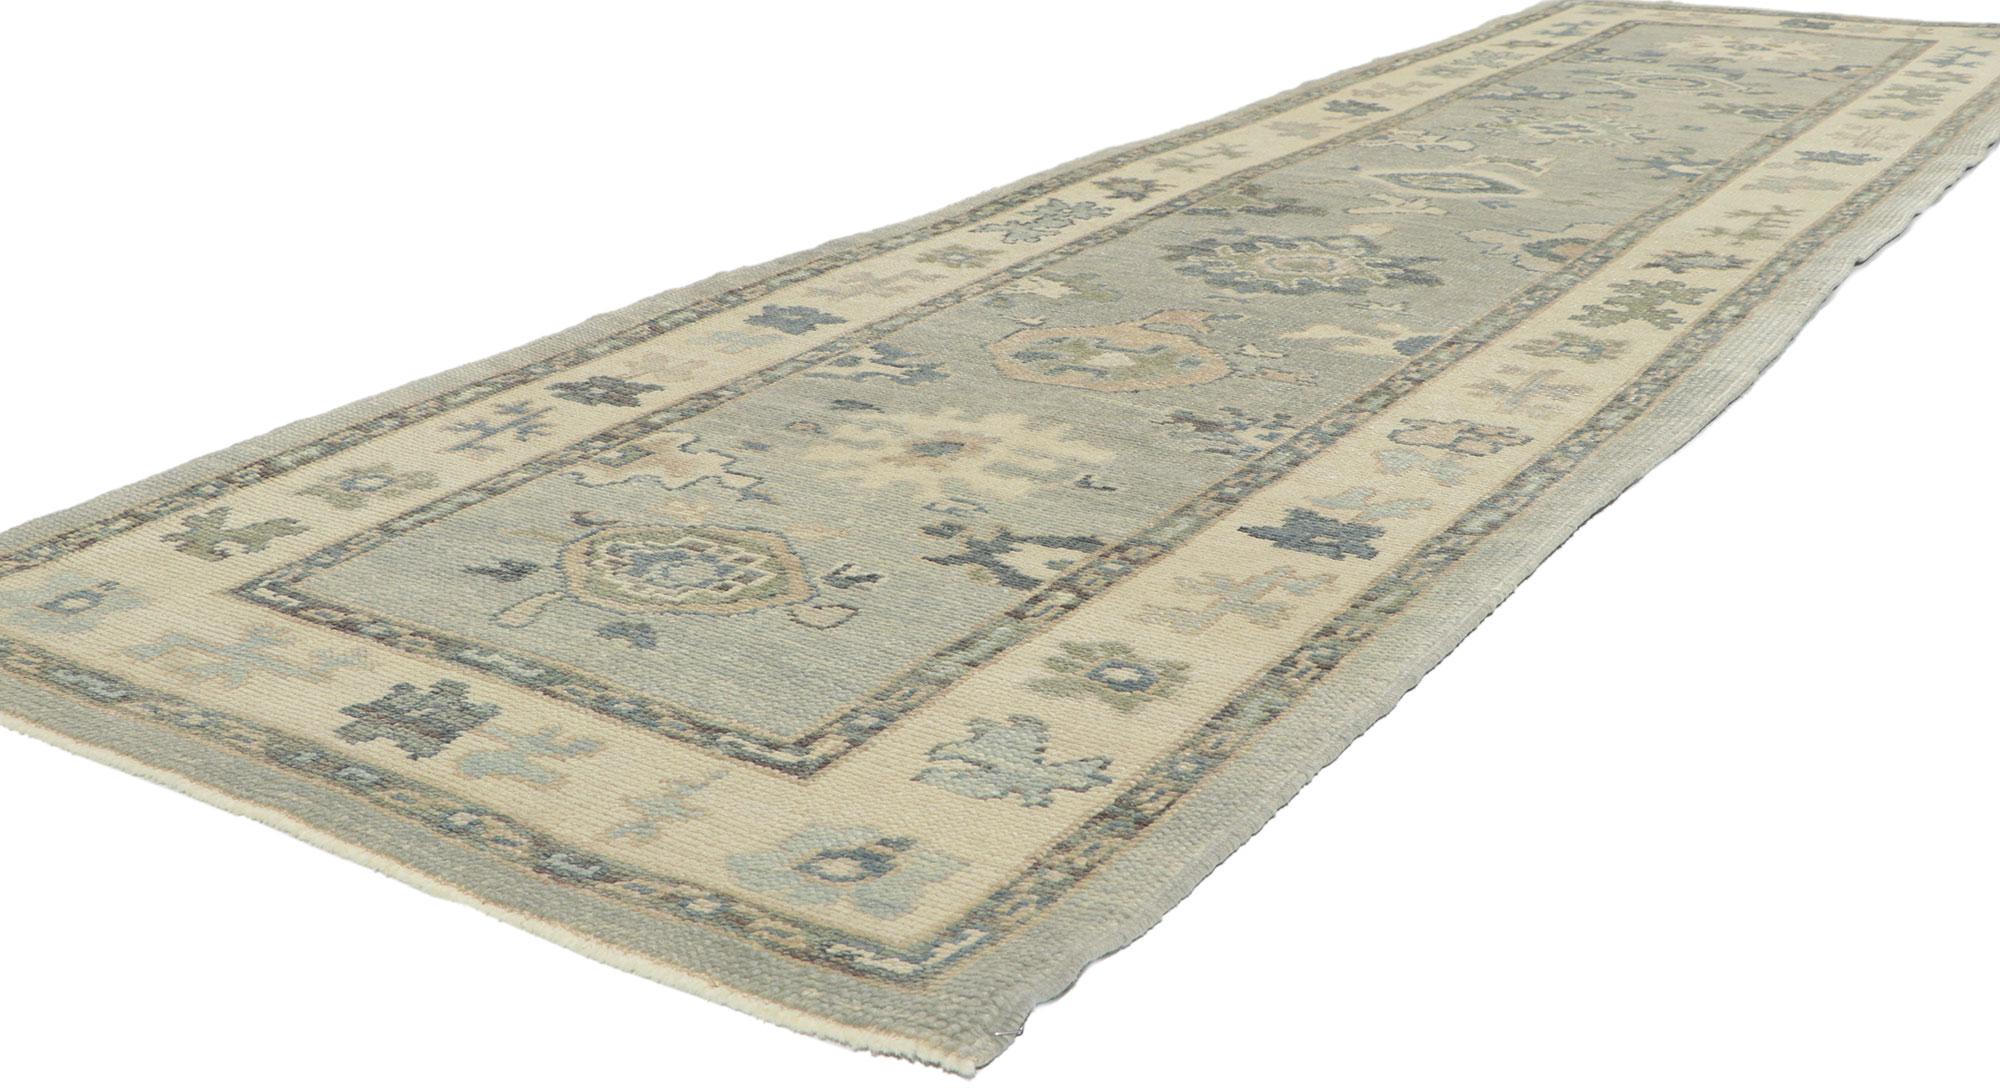 53788 New Contemporary Turkish Oushak Hallway Runner with Modern Style 03'02 x 11'01. This hand-knotted wool contemporary Turkish Oushak runner features an all-over botanical pattern composed of amorphous organic motifs spread across an abrashed